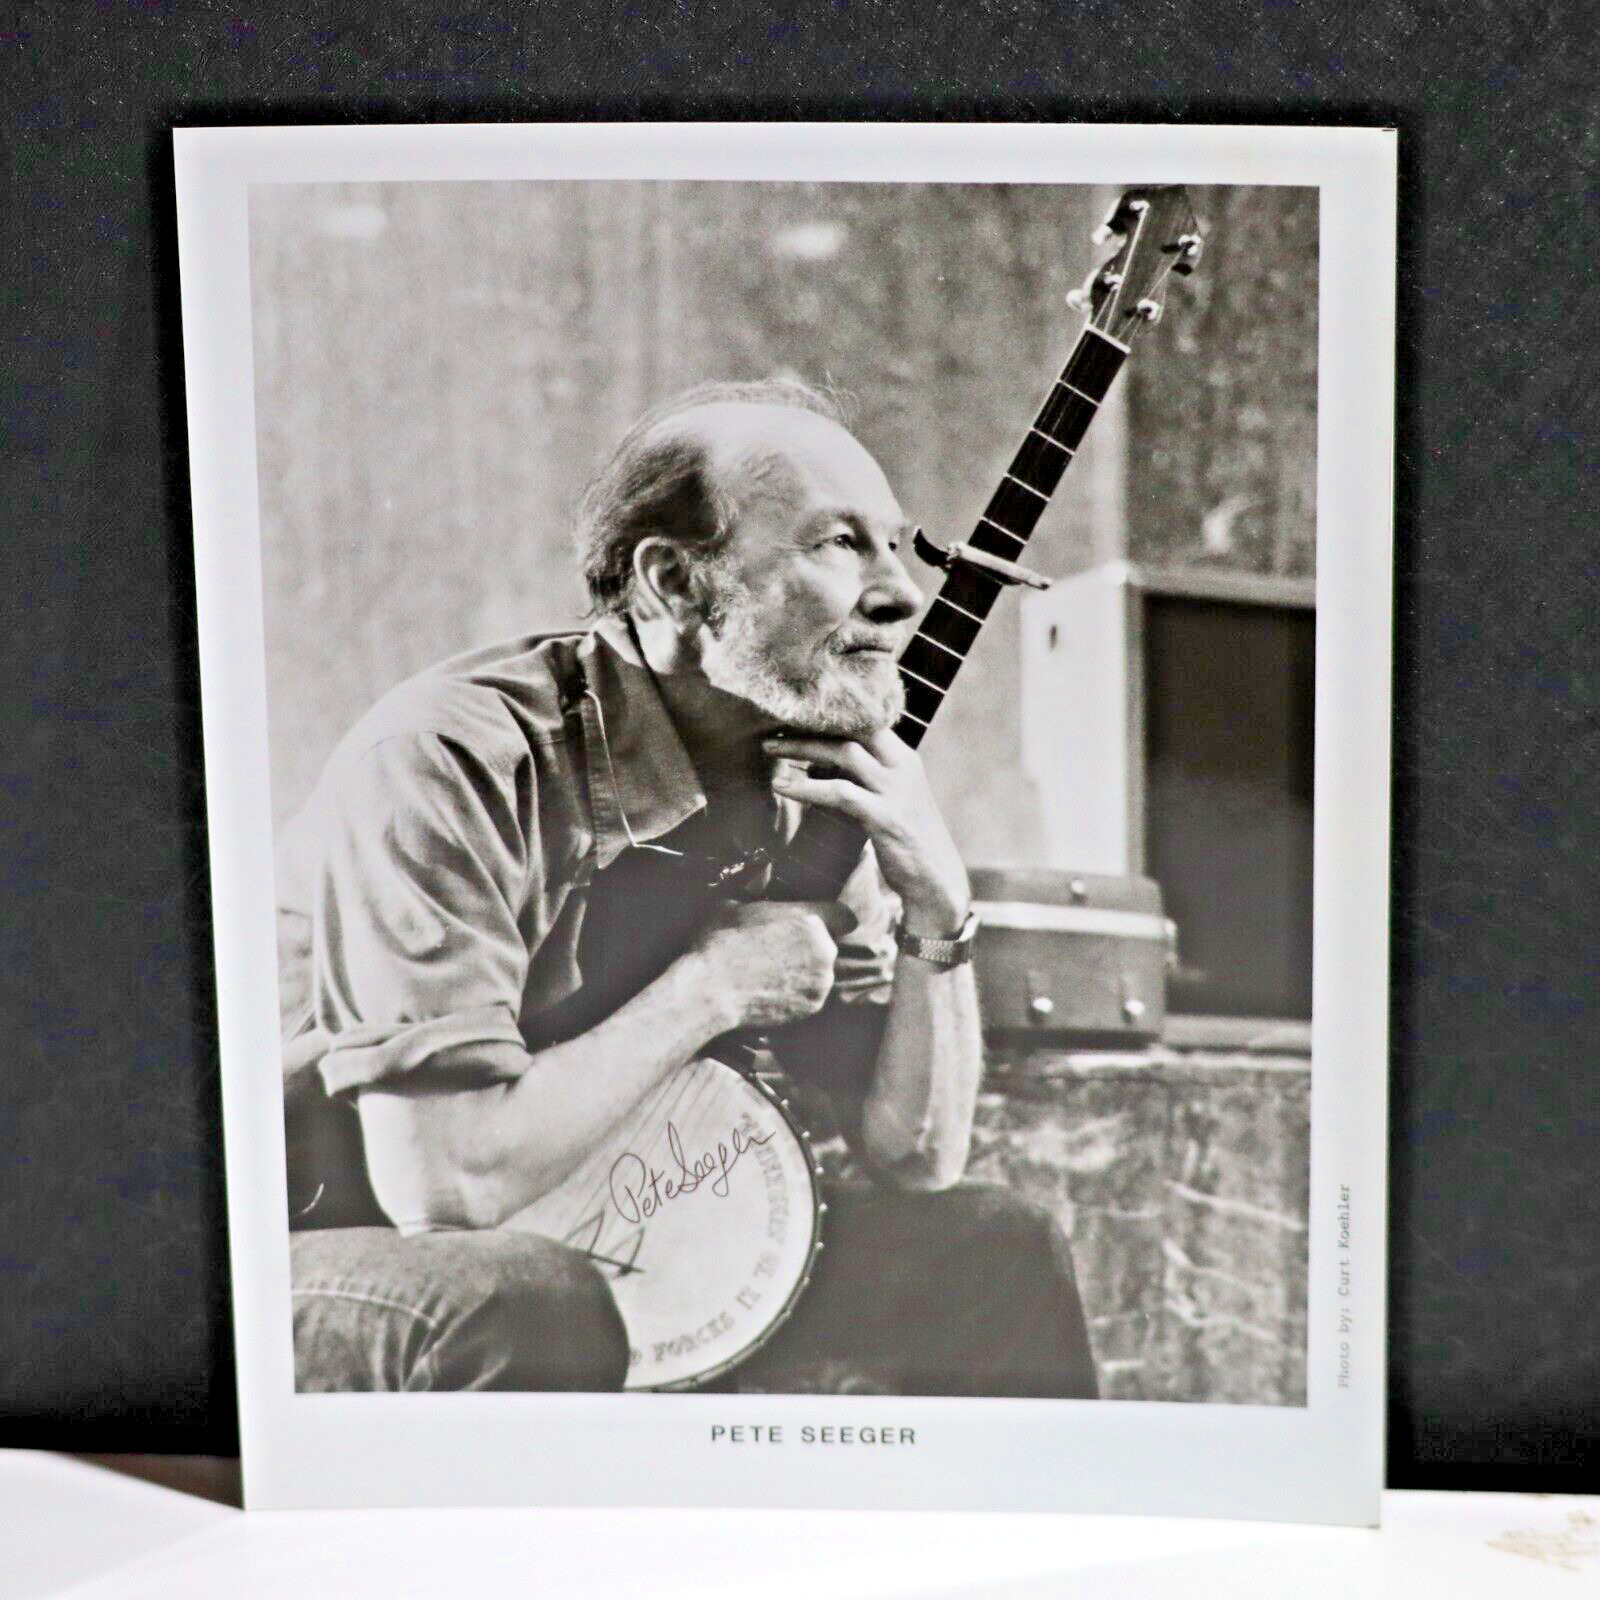 Pete Seeger Folk Singer Autograph Signature 8X10 B&W Photo From Collector